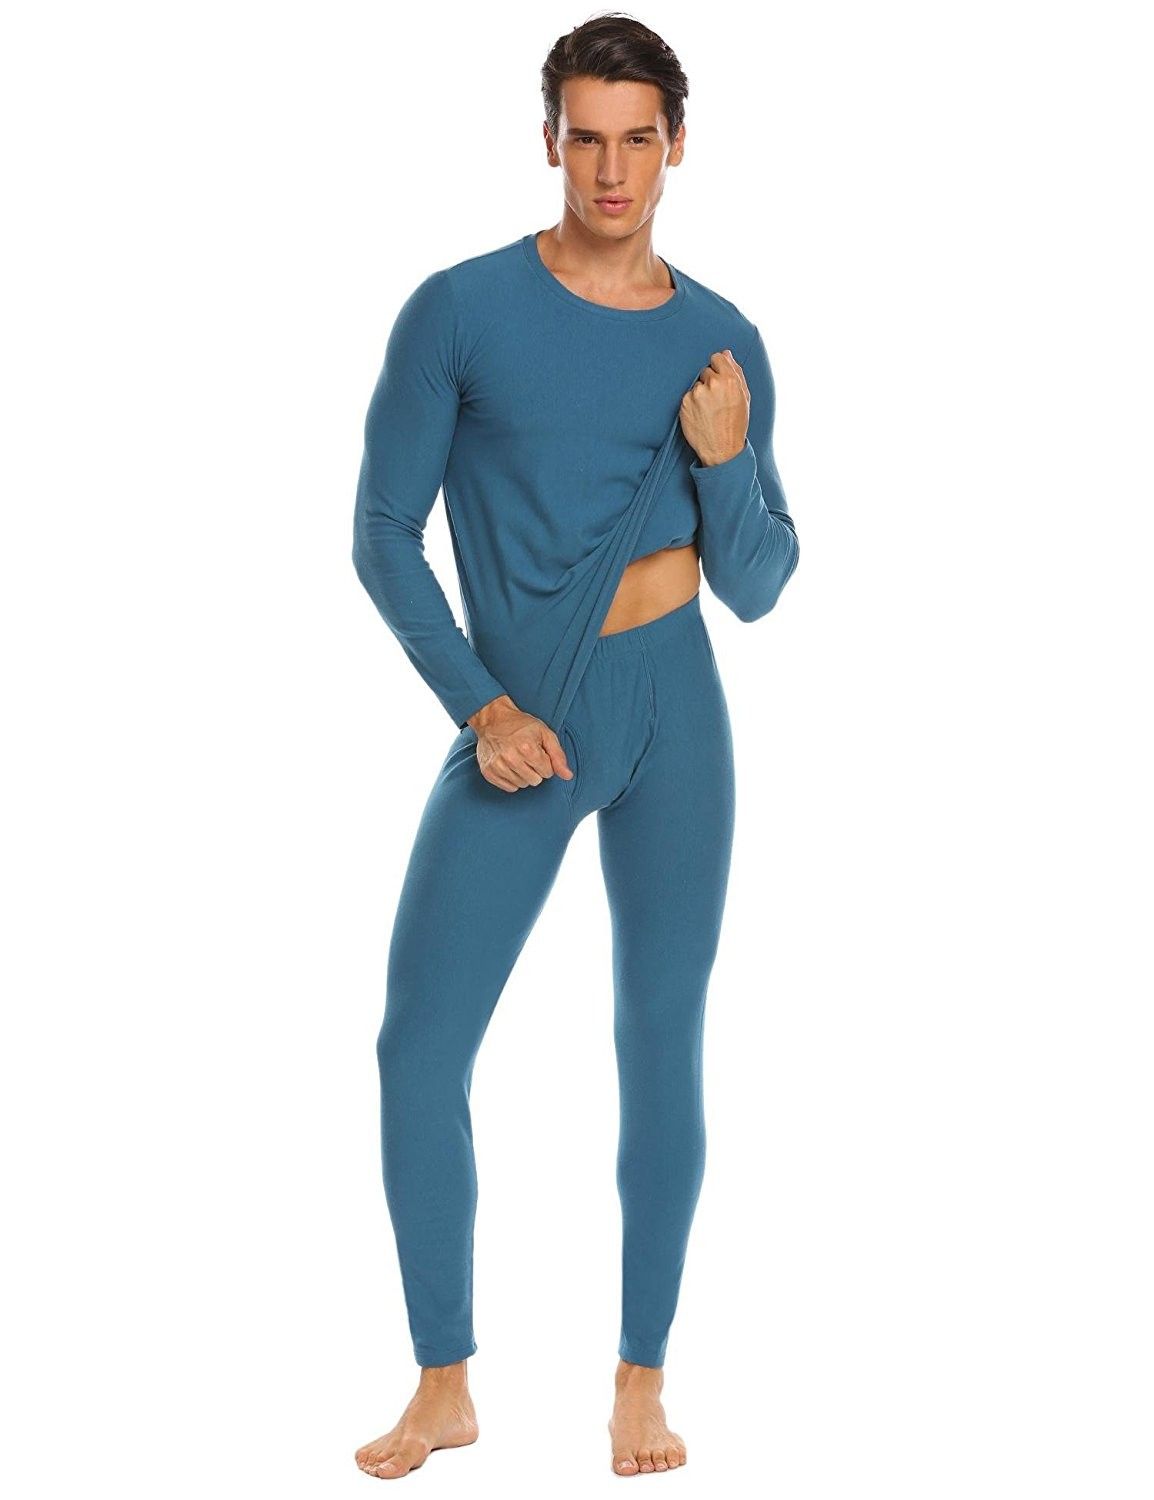 A Detailed Guide on Wearing Men's Long Johns in Public - The Kosha Journal